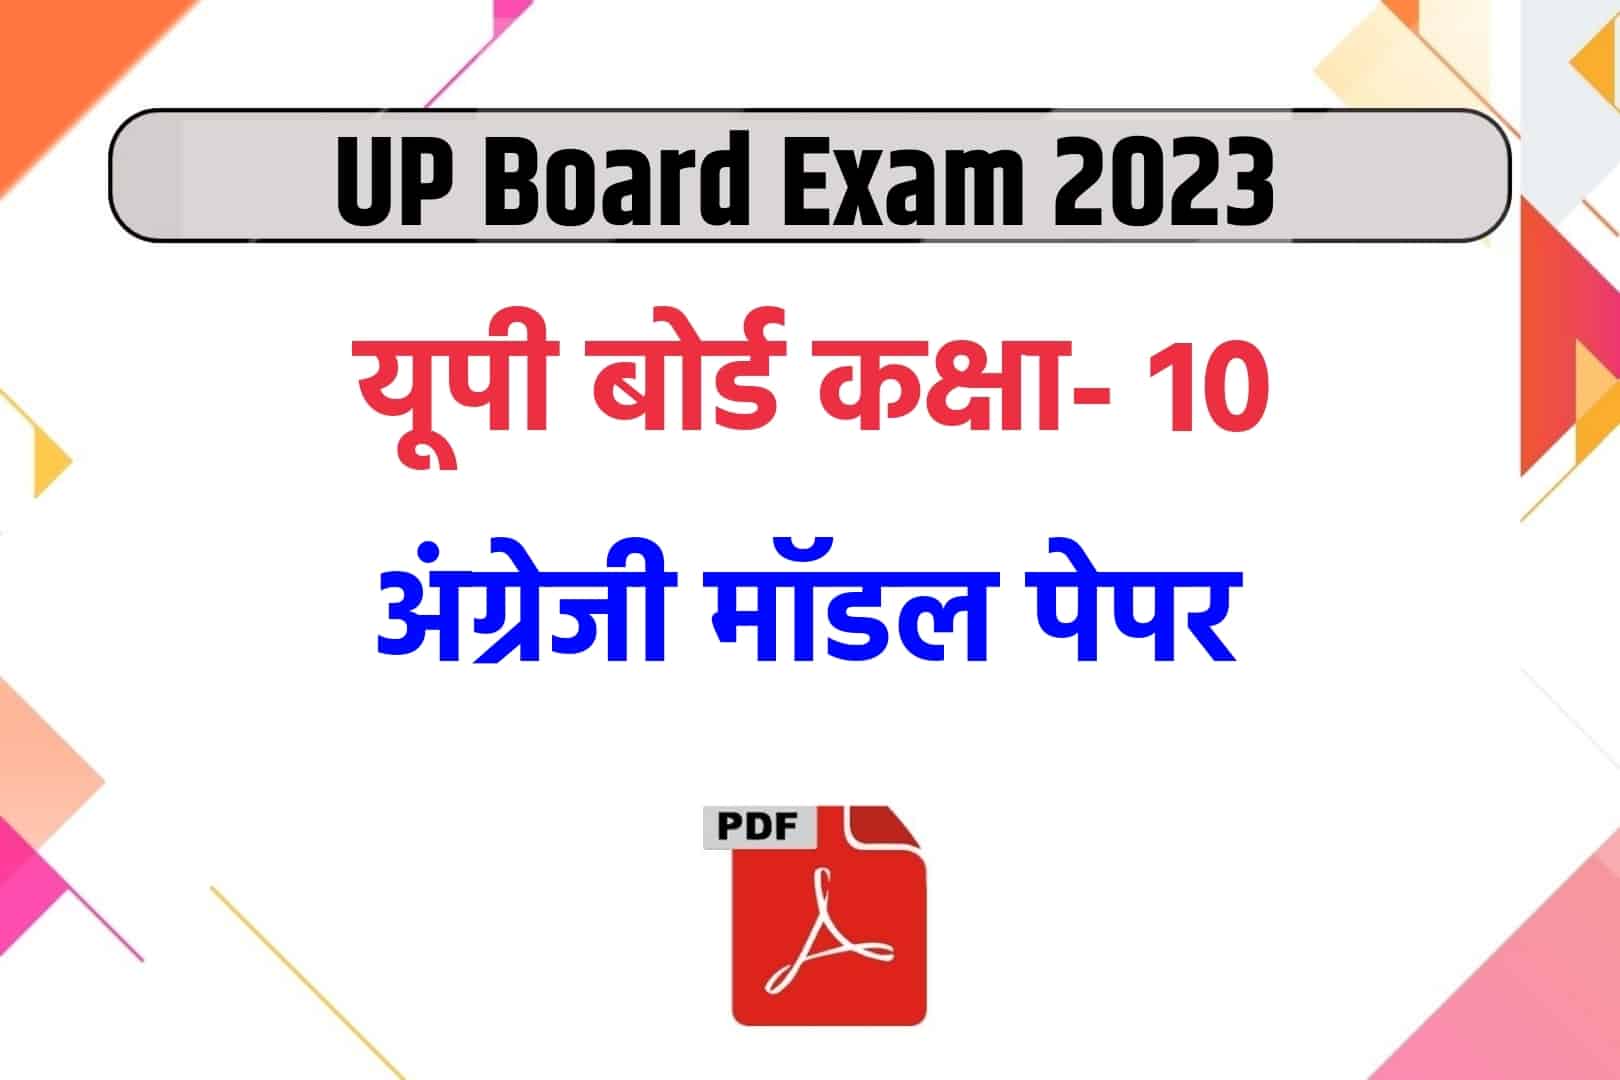 UP Board Class 10th English Model Paper 2023